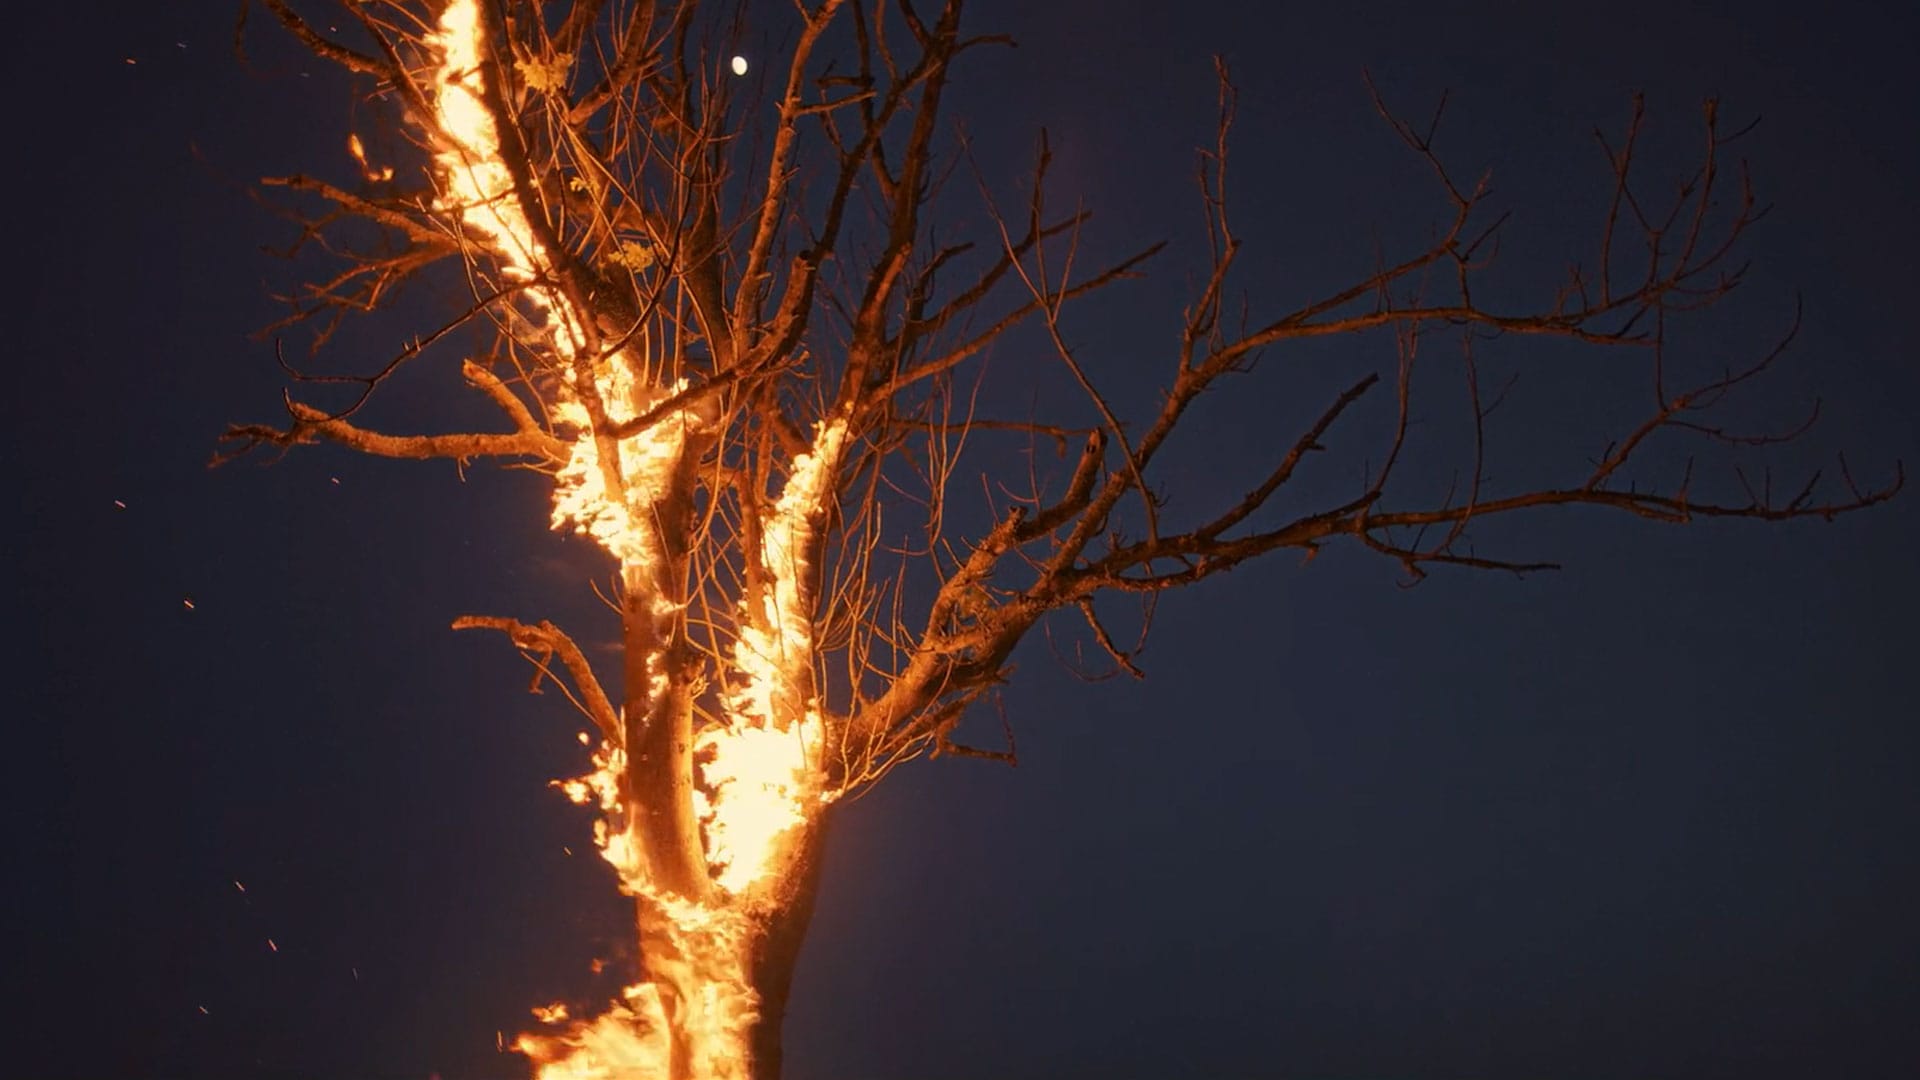 A barren tree in flames, from top to bottom, against a night sky; part of a promo video for WildKitchens